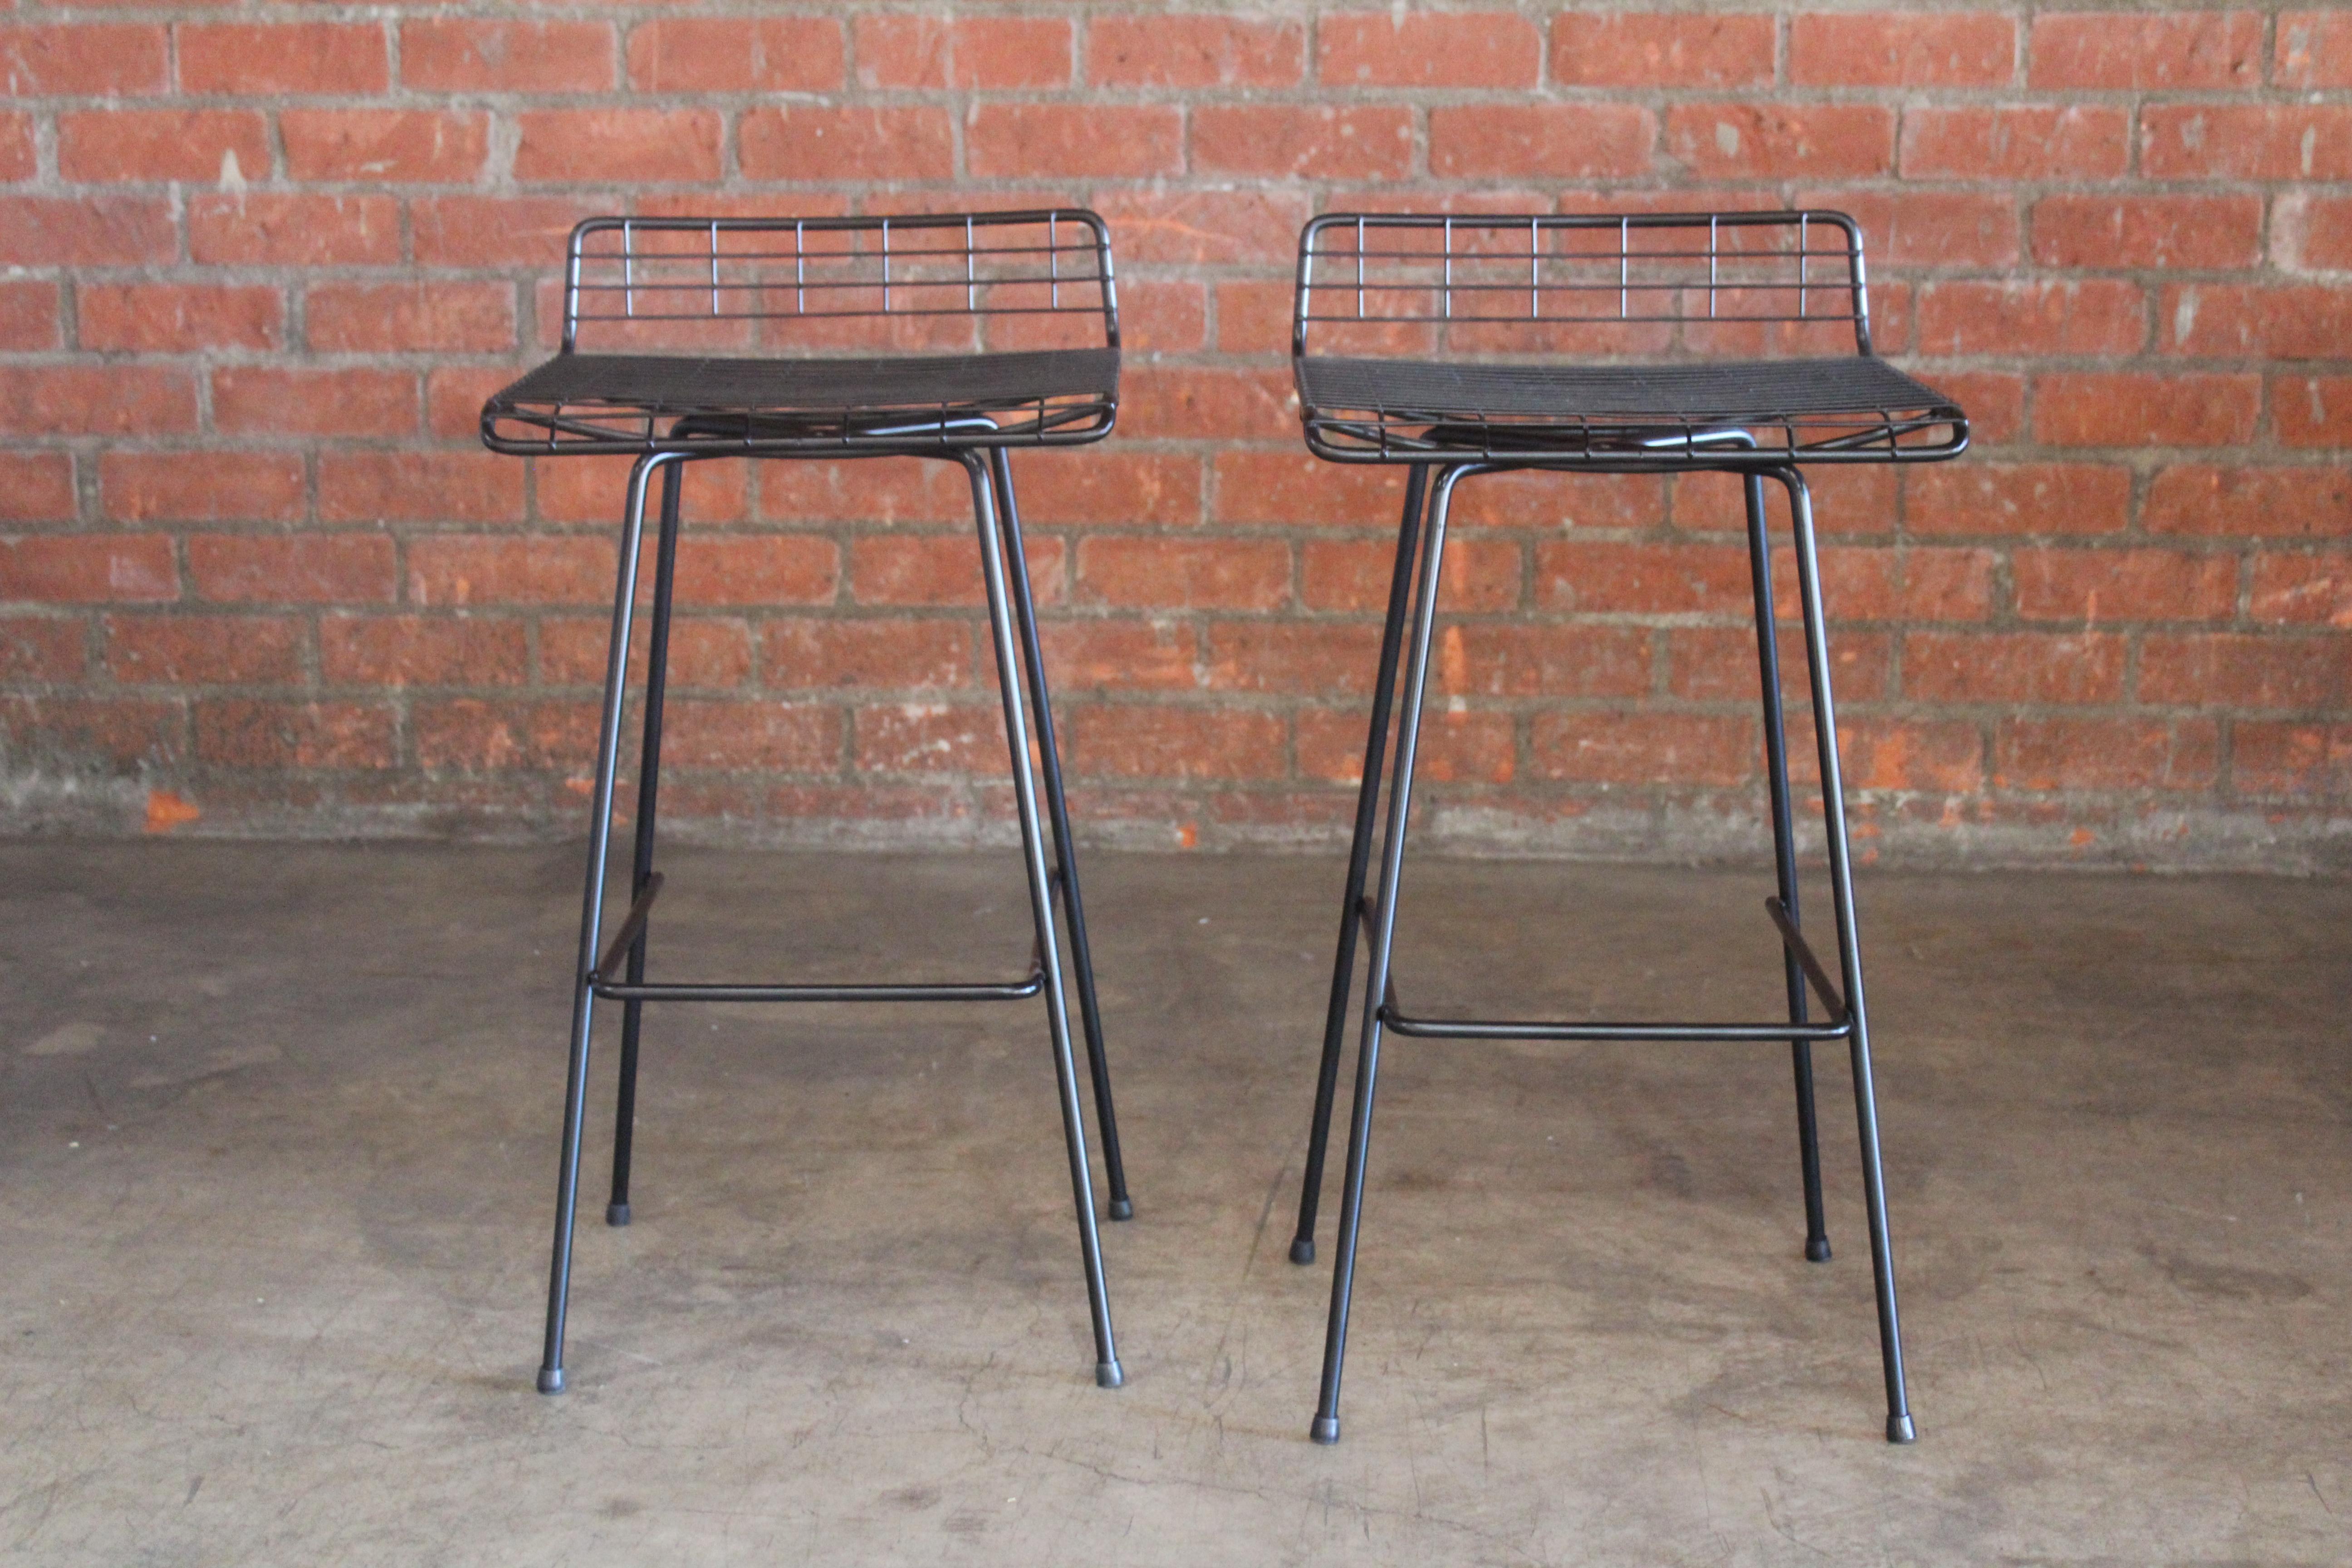 Pair of iron bar stools by John Keal for Pacific Iron, California, 1950s. The pair are in excellent pristine condition. New rubber foot glides. Sold as a pair.